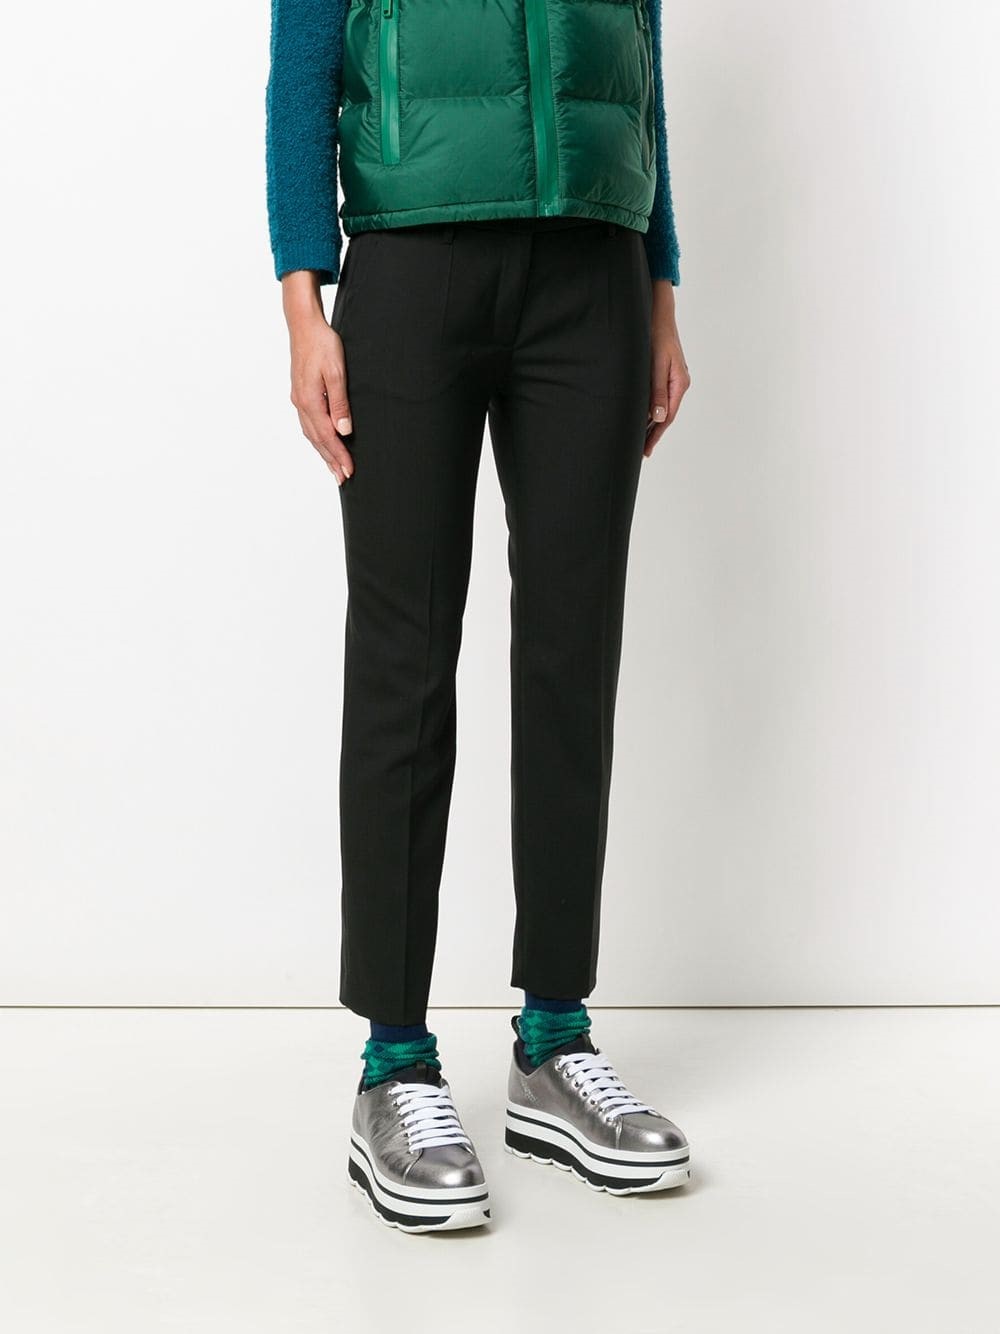 prada TROUSERS available on montiboutique.com - 28707